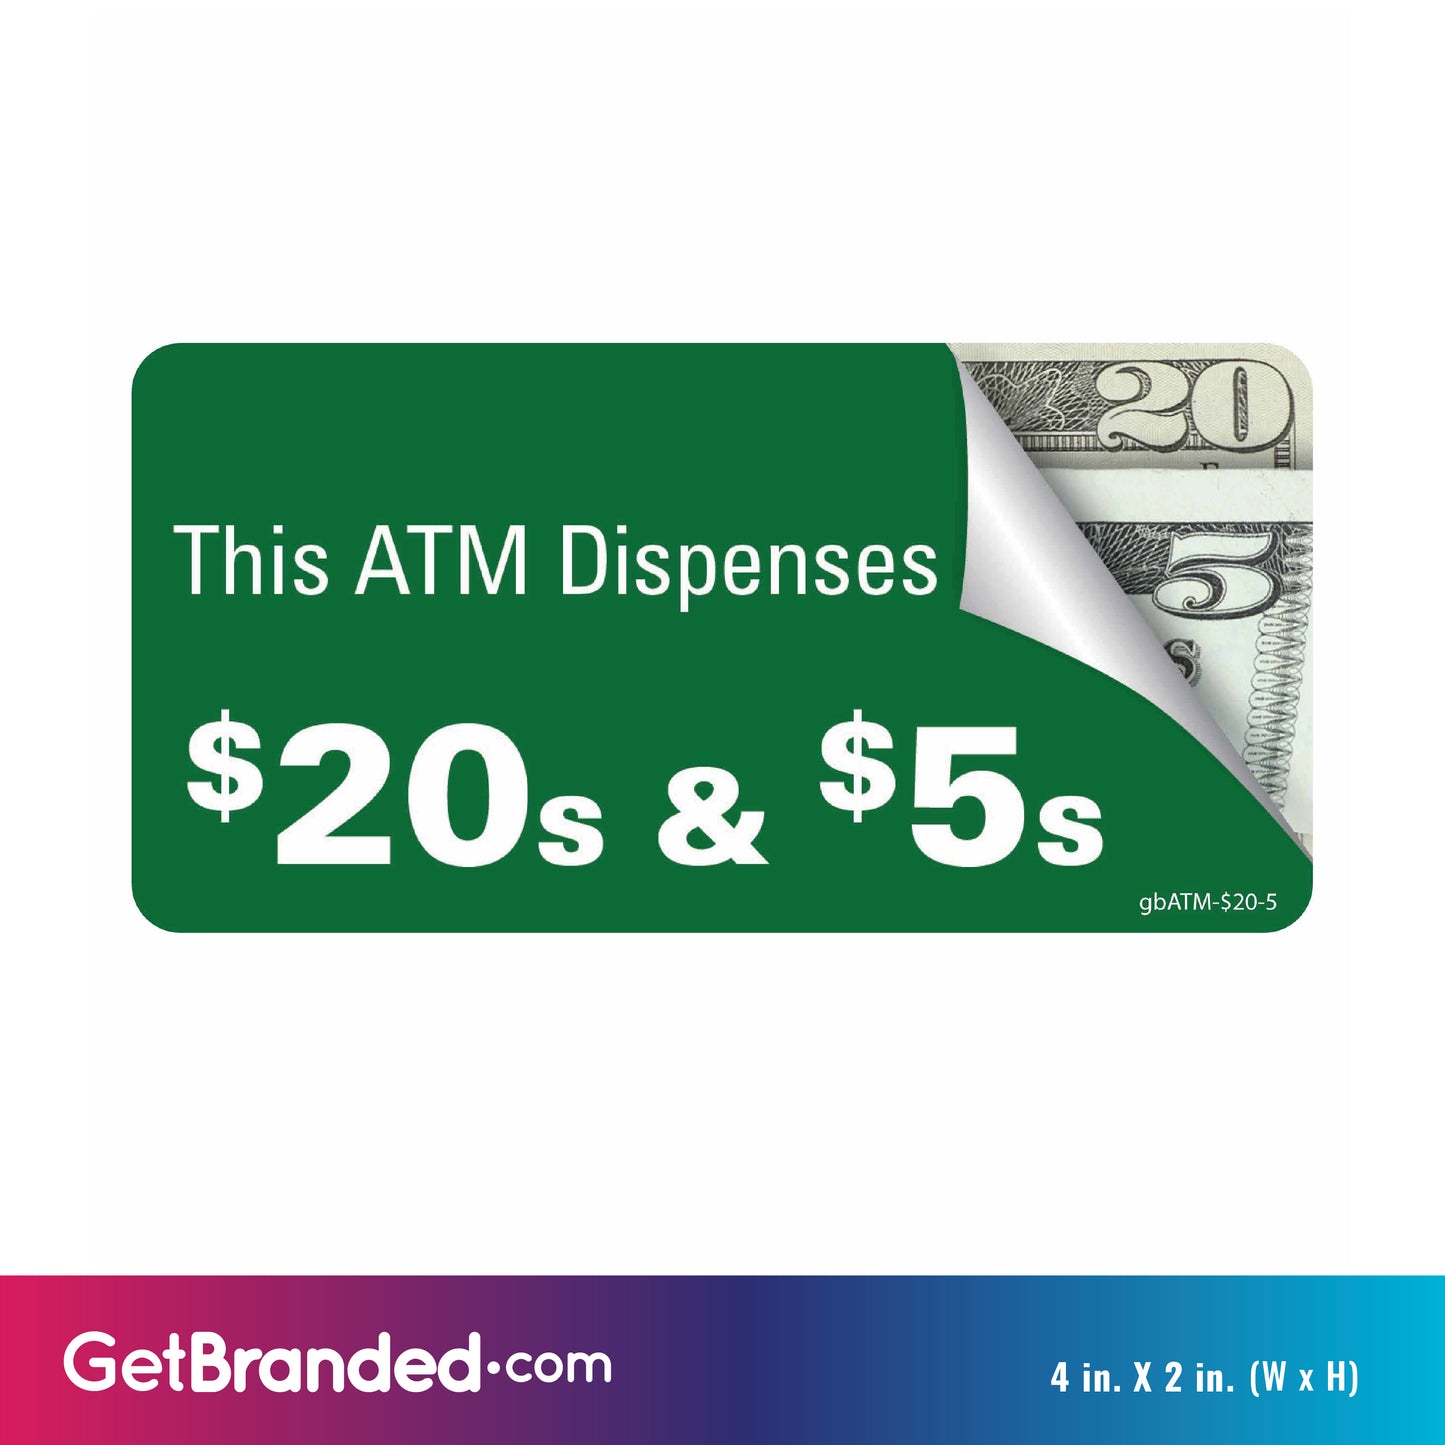 Pro ATM Dispense $20's & $5's Decal size guide. 4 inches by 2 inches in size.